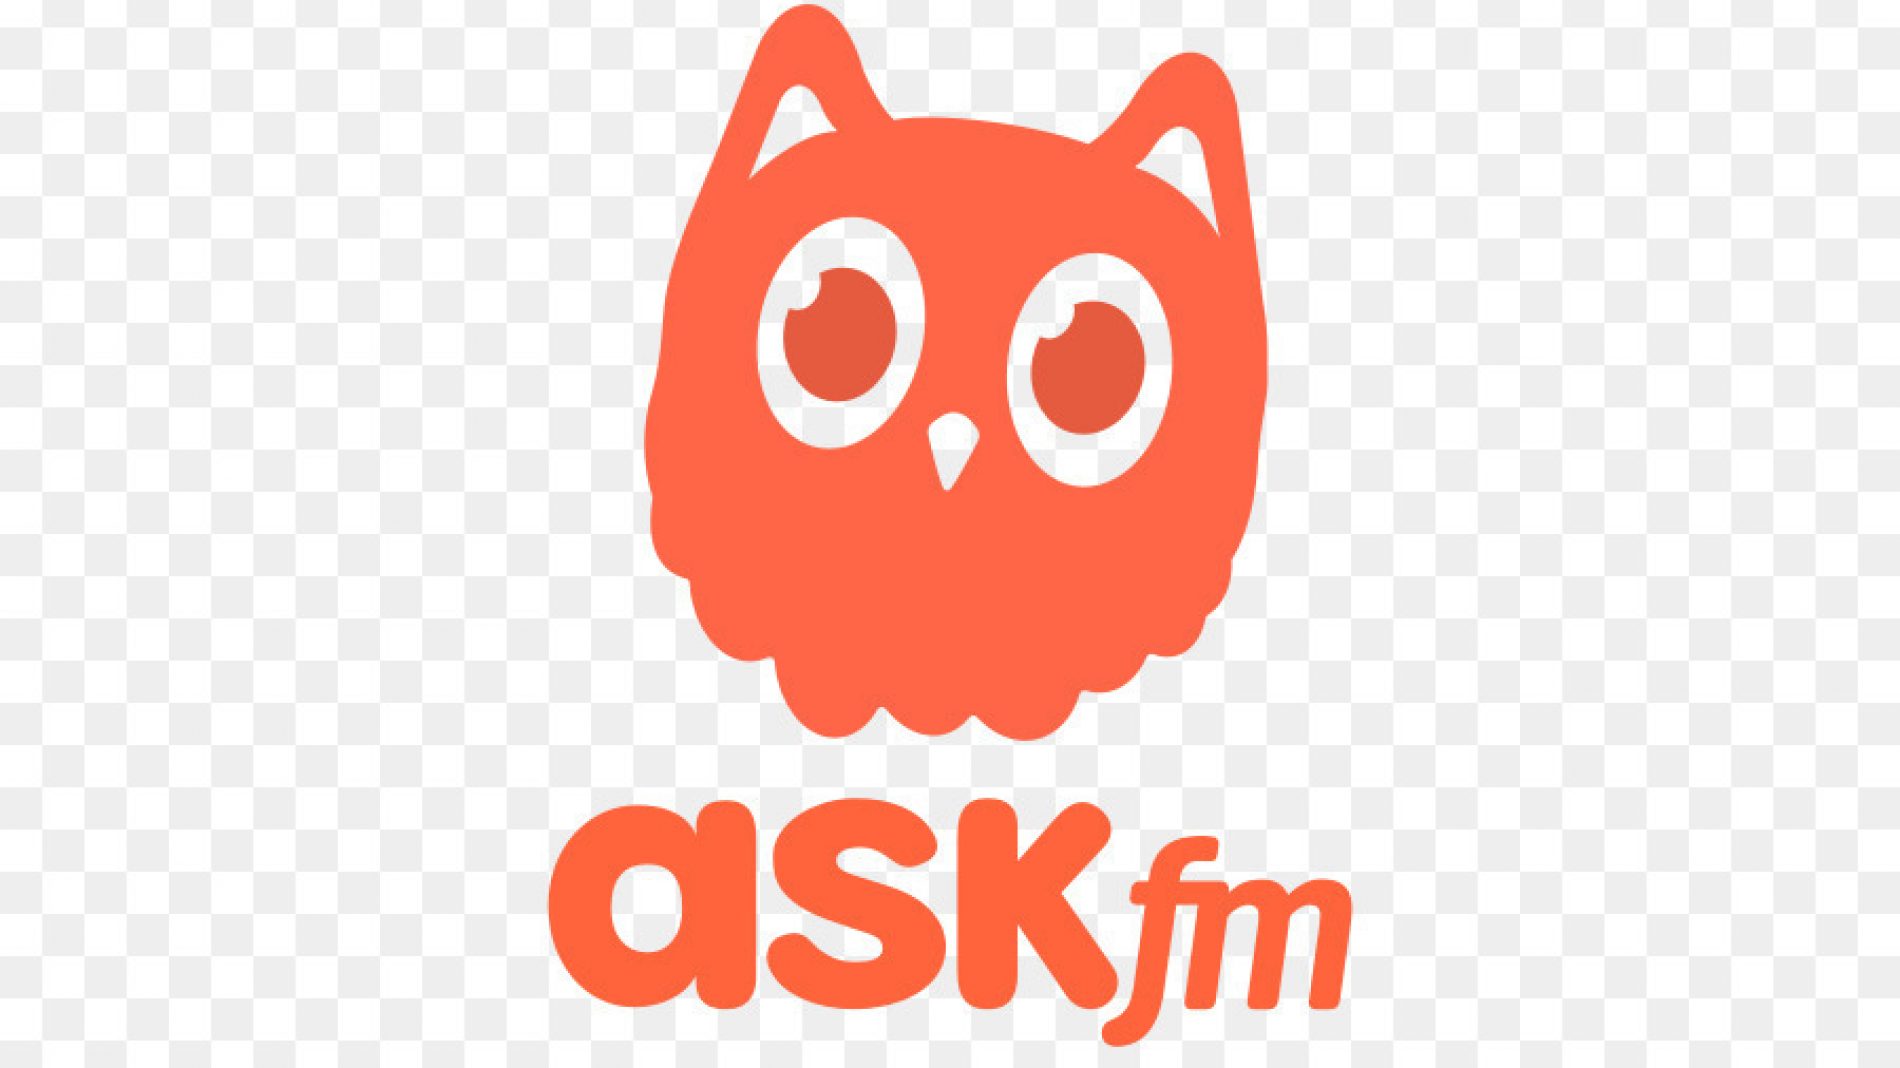 kisspng-ask-fm-question-logo-company-maddie-ziegler-5acd5c09a21a05.813275581523407881664